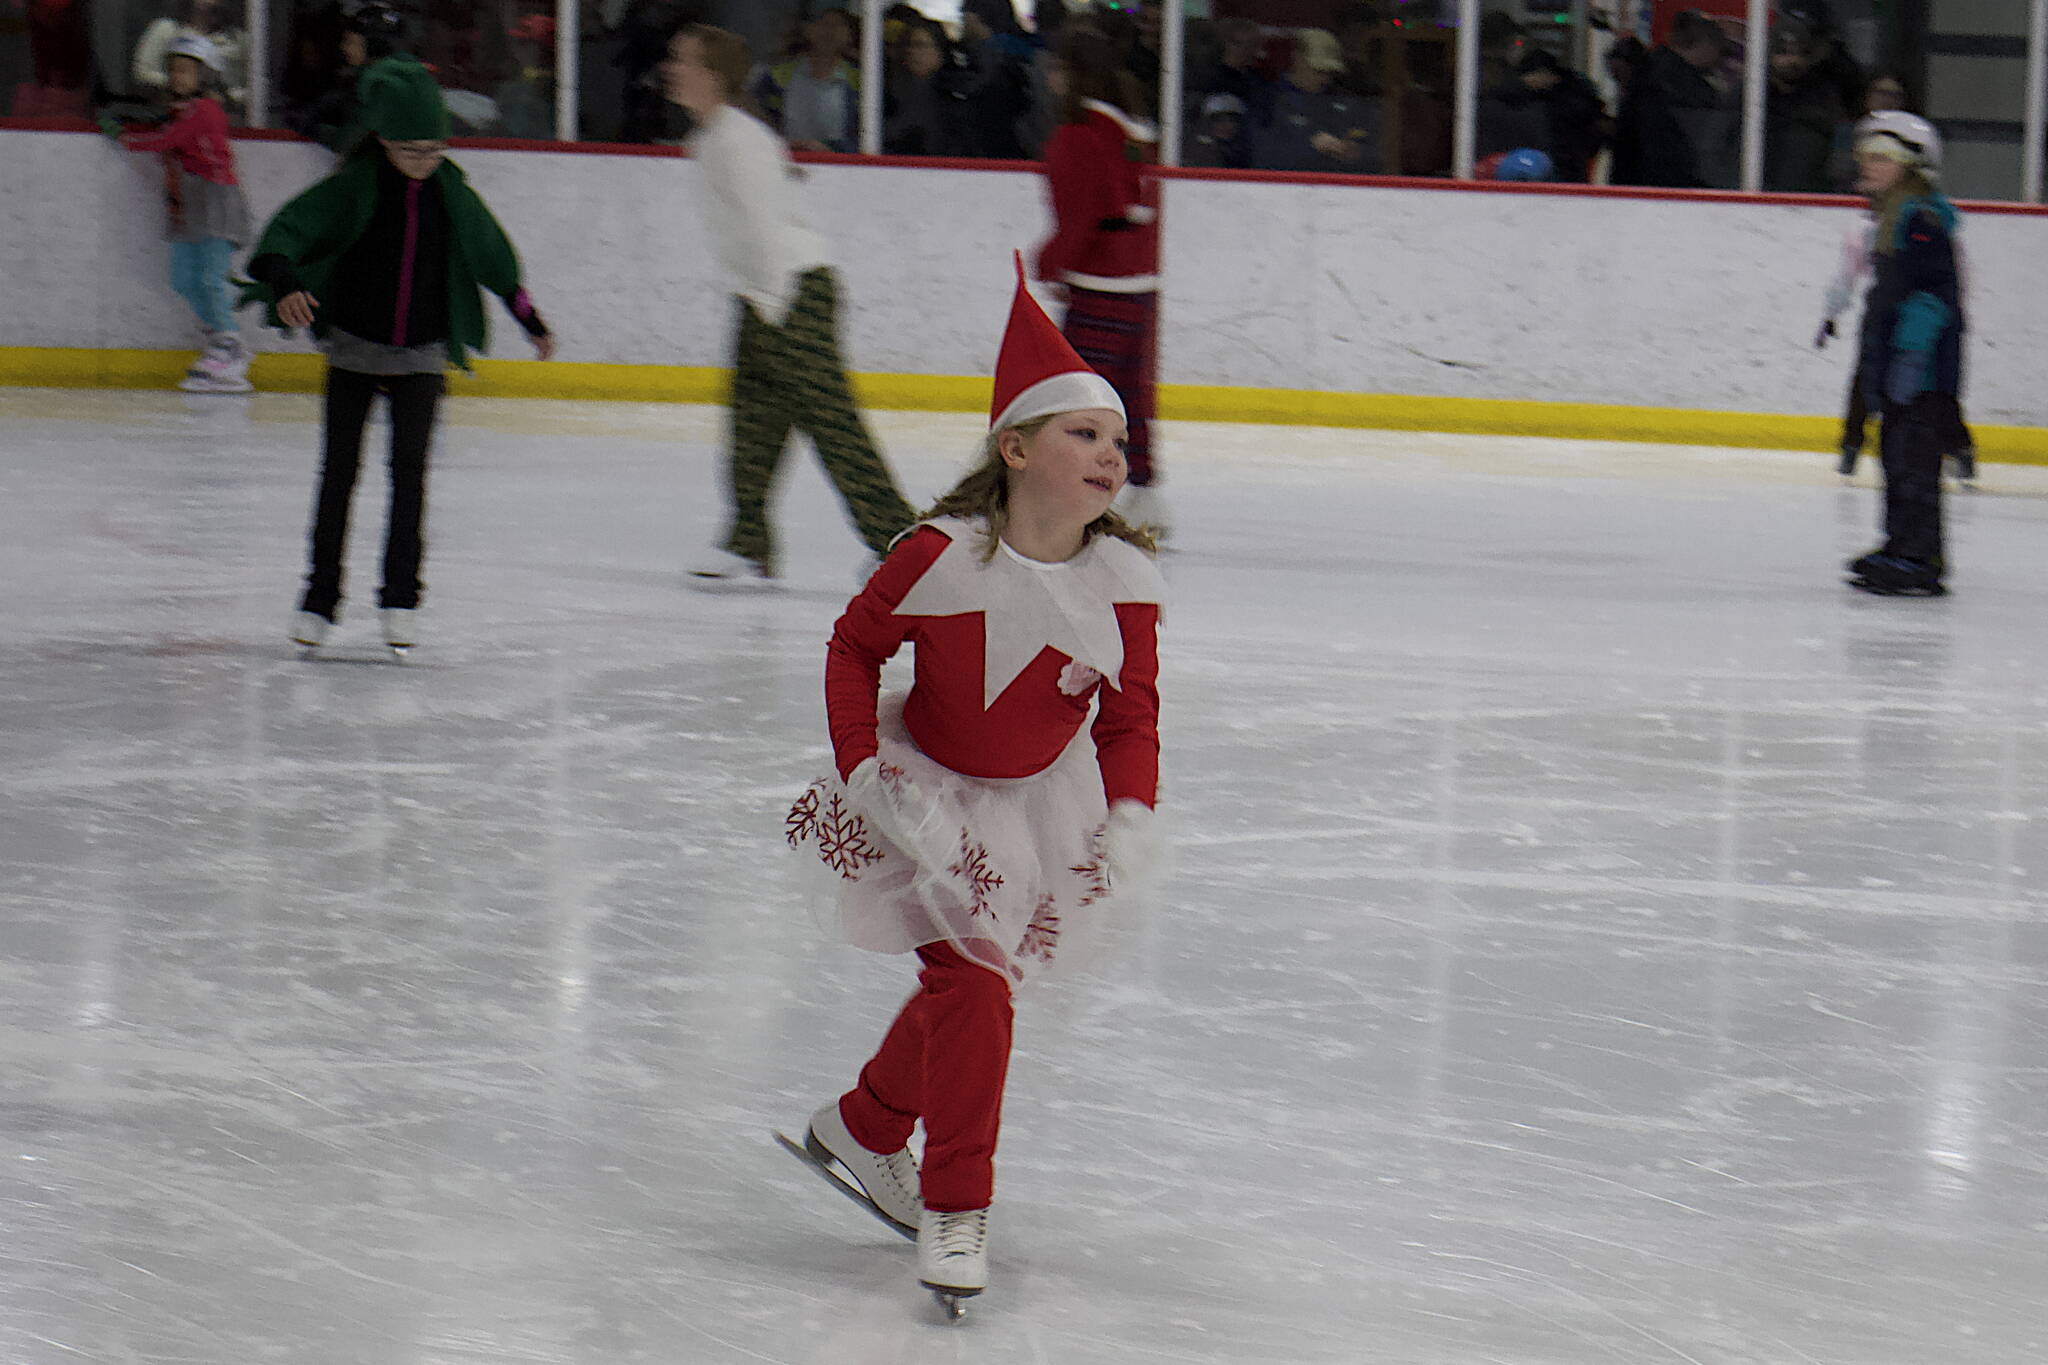 An energetic Santa’s helper speeds along the ice during the annual Santa Skate at Treadwell Arena on Friday night.(Mark Sabbatini / Juneau Empire)